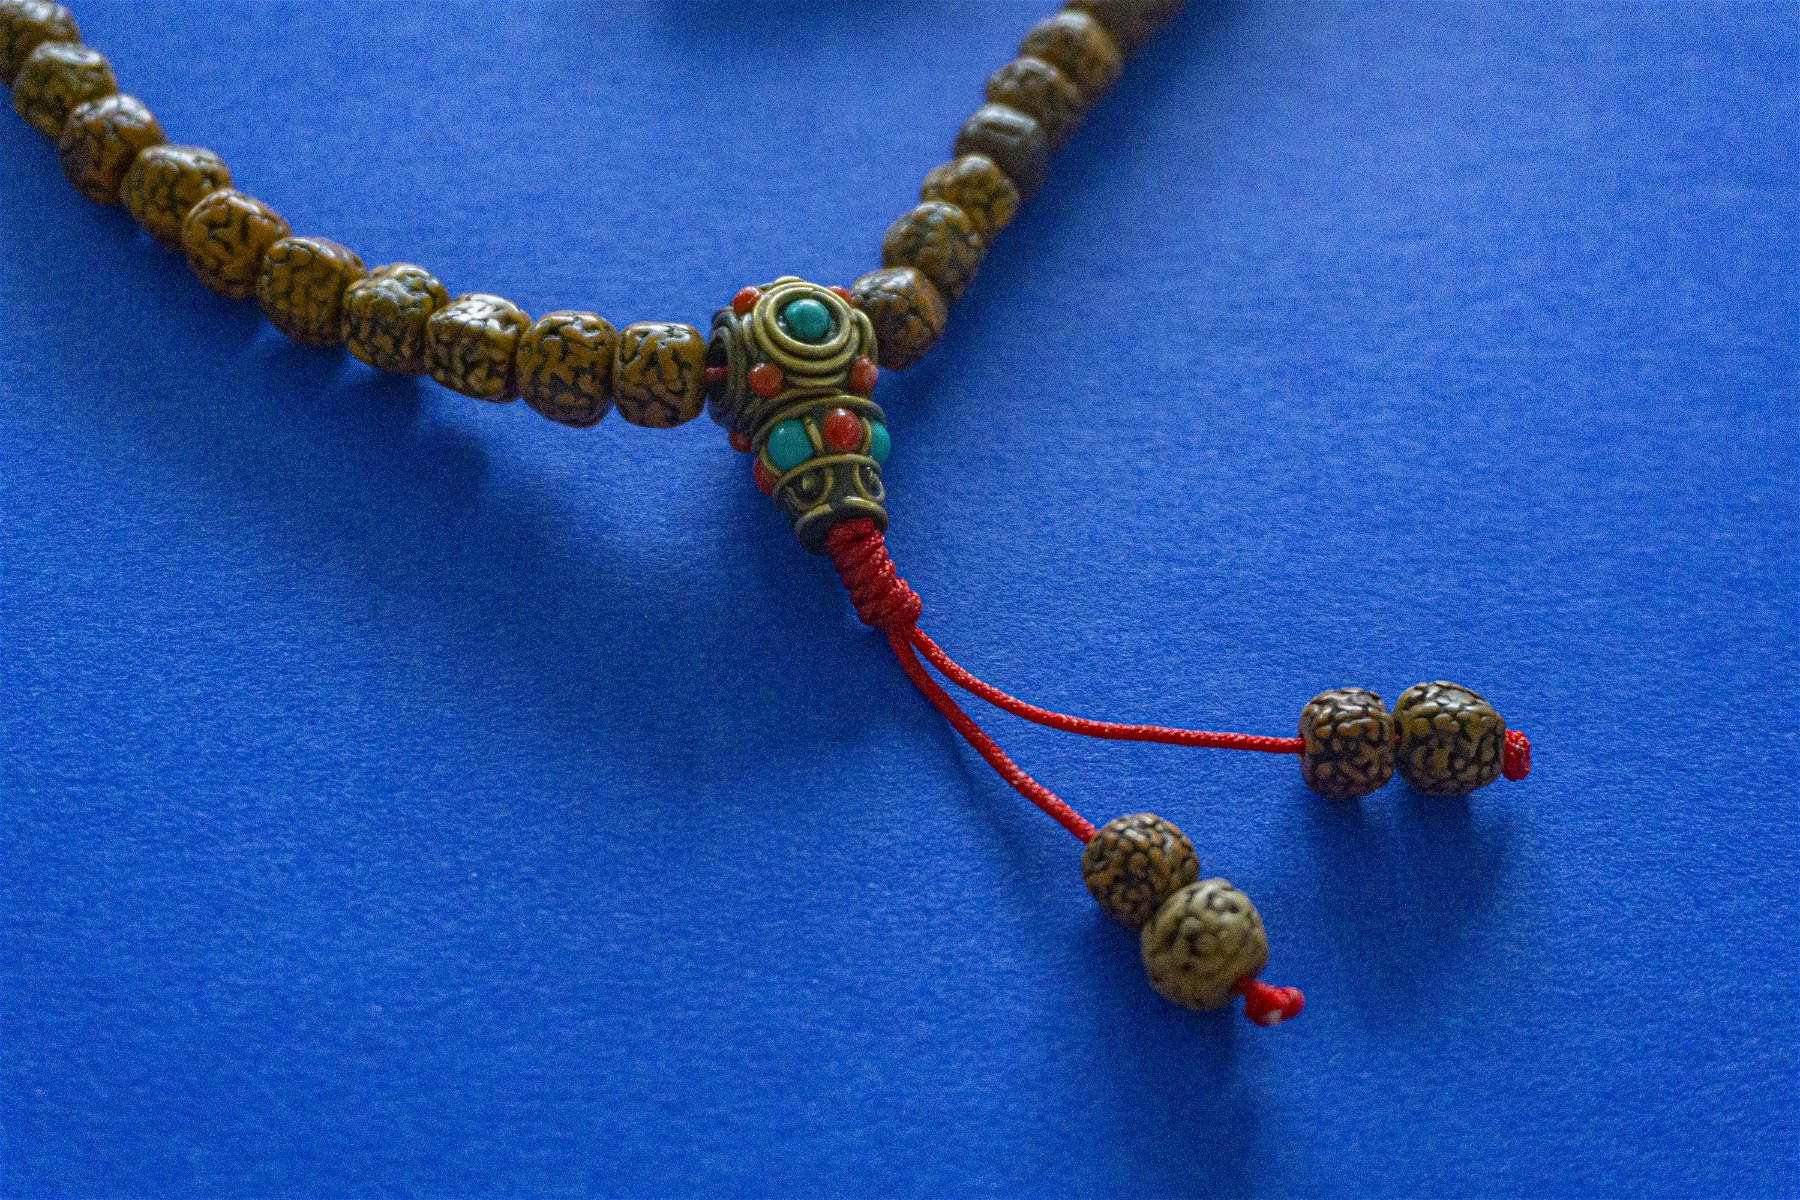 what is a mala necklace and how do you use it for meditation?